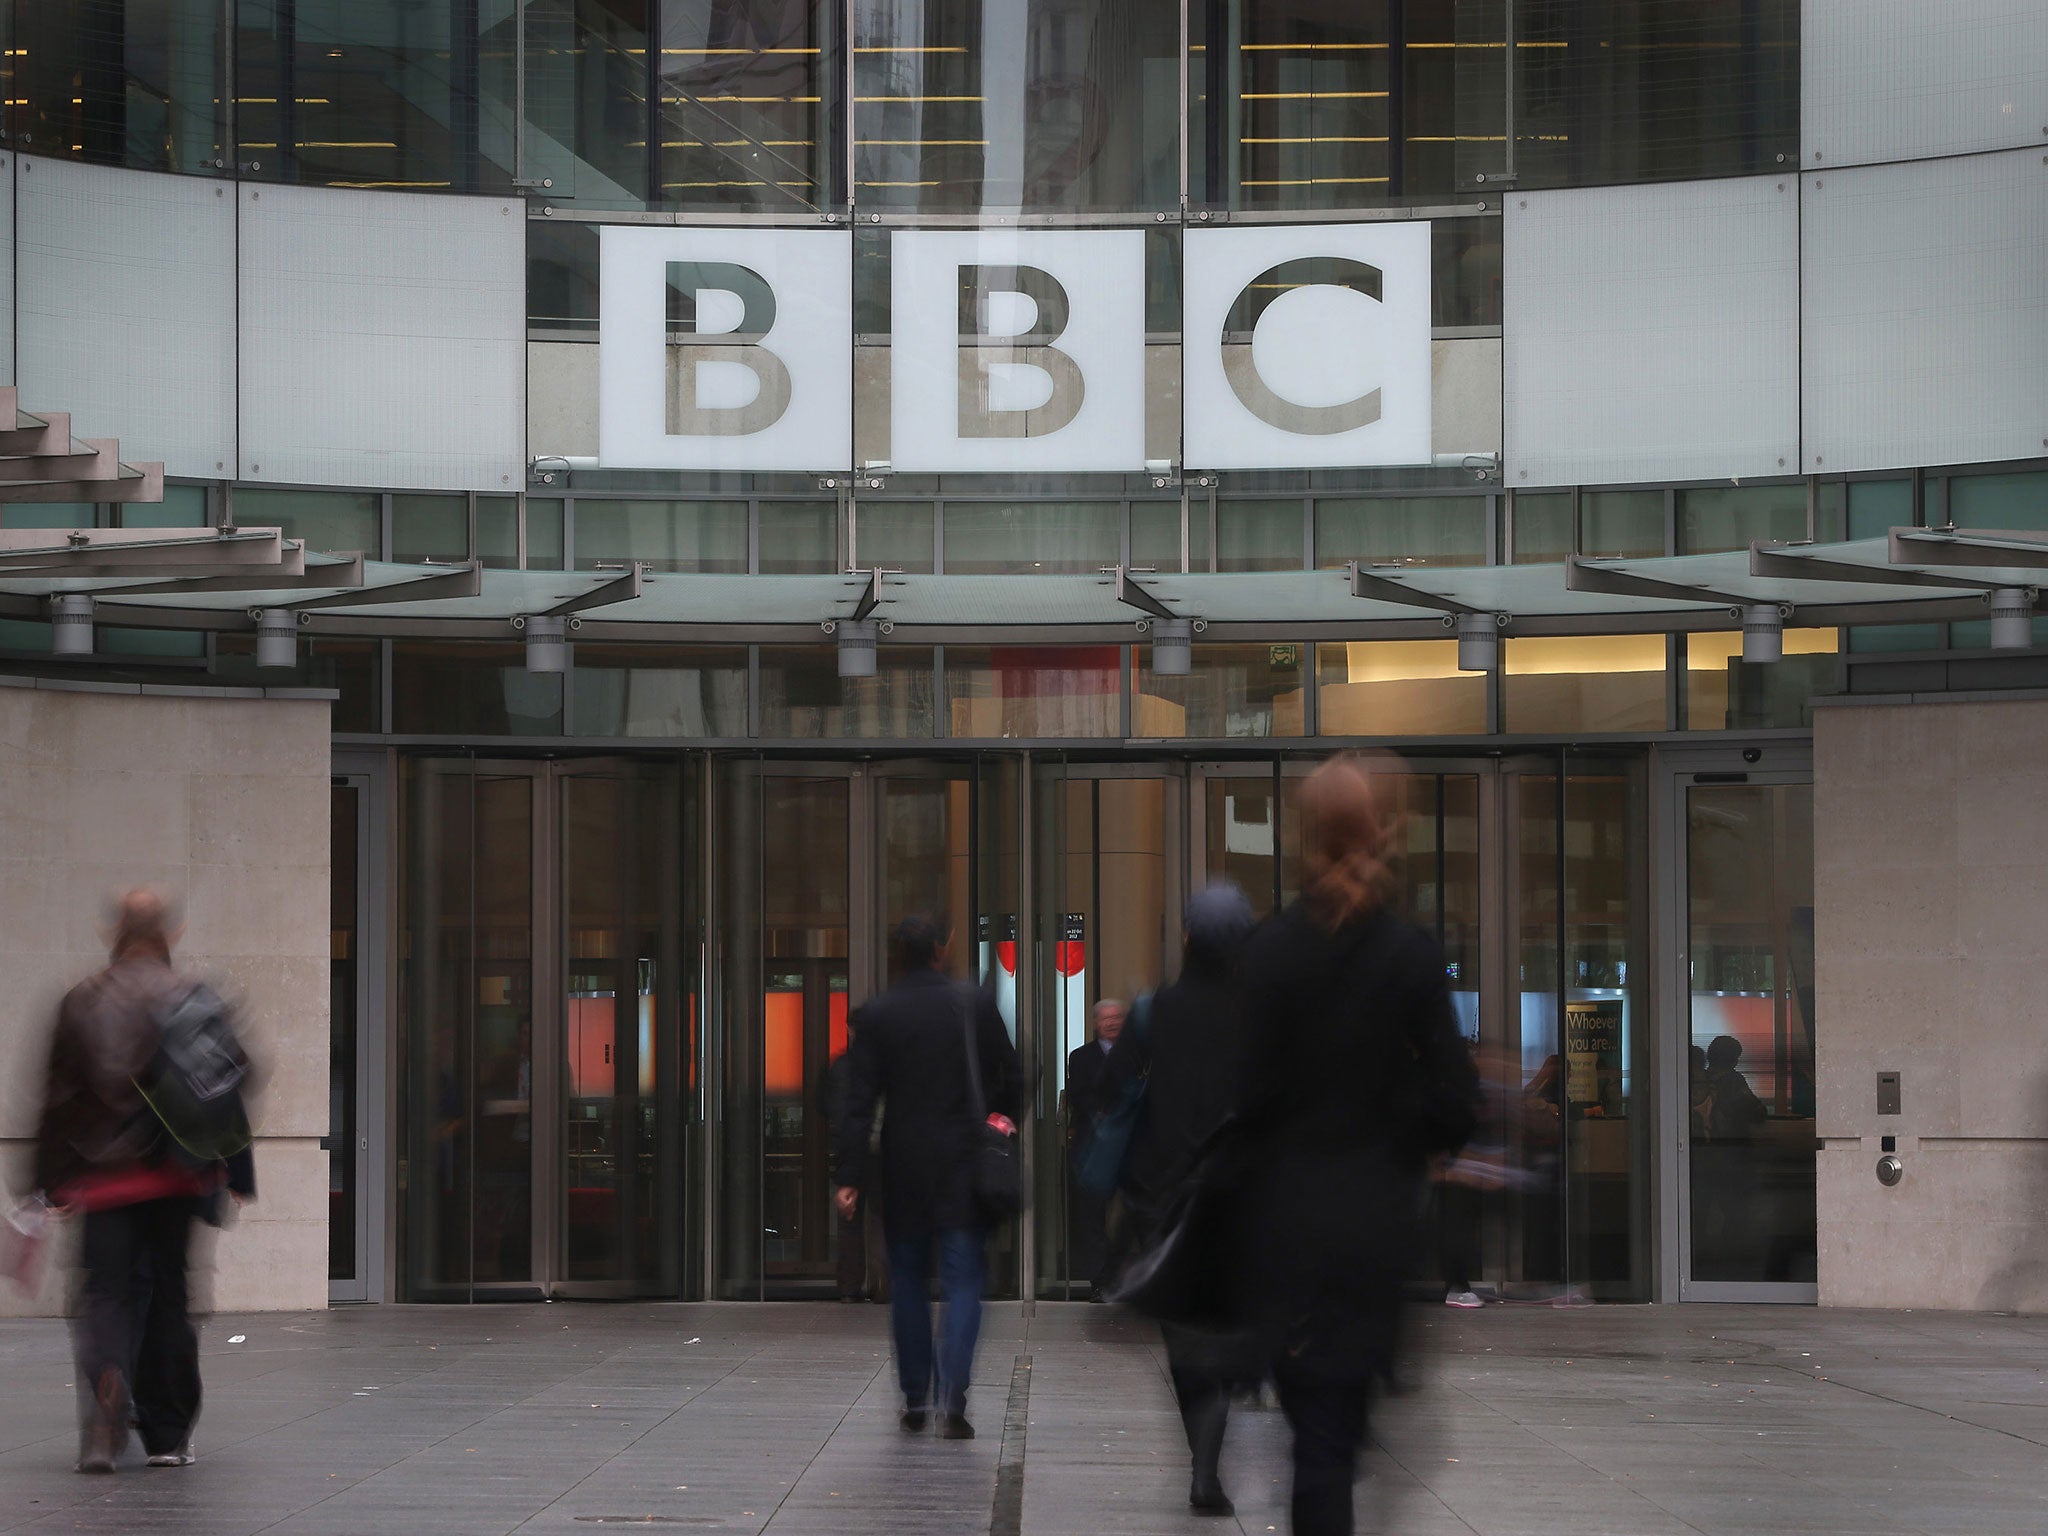 The BBC licence fee was frozen in 2010